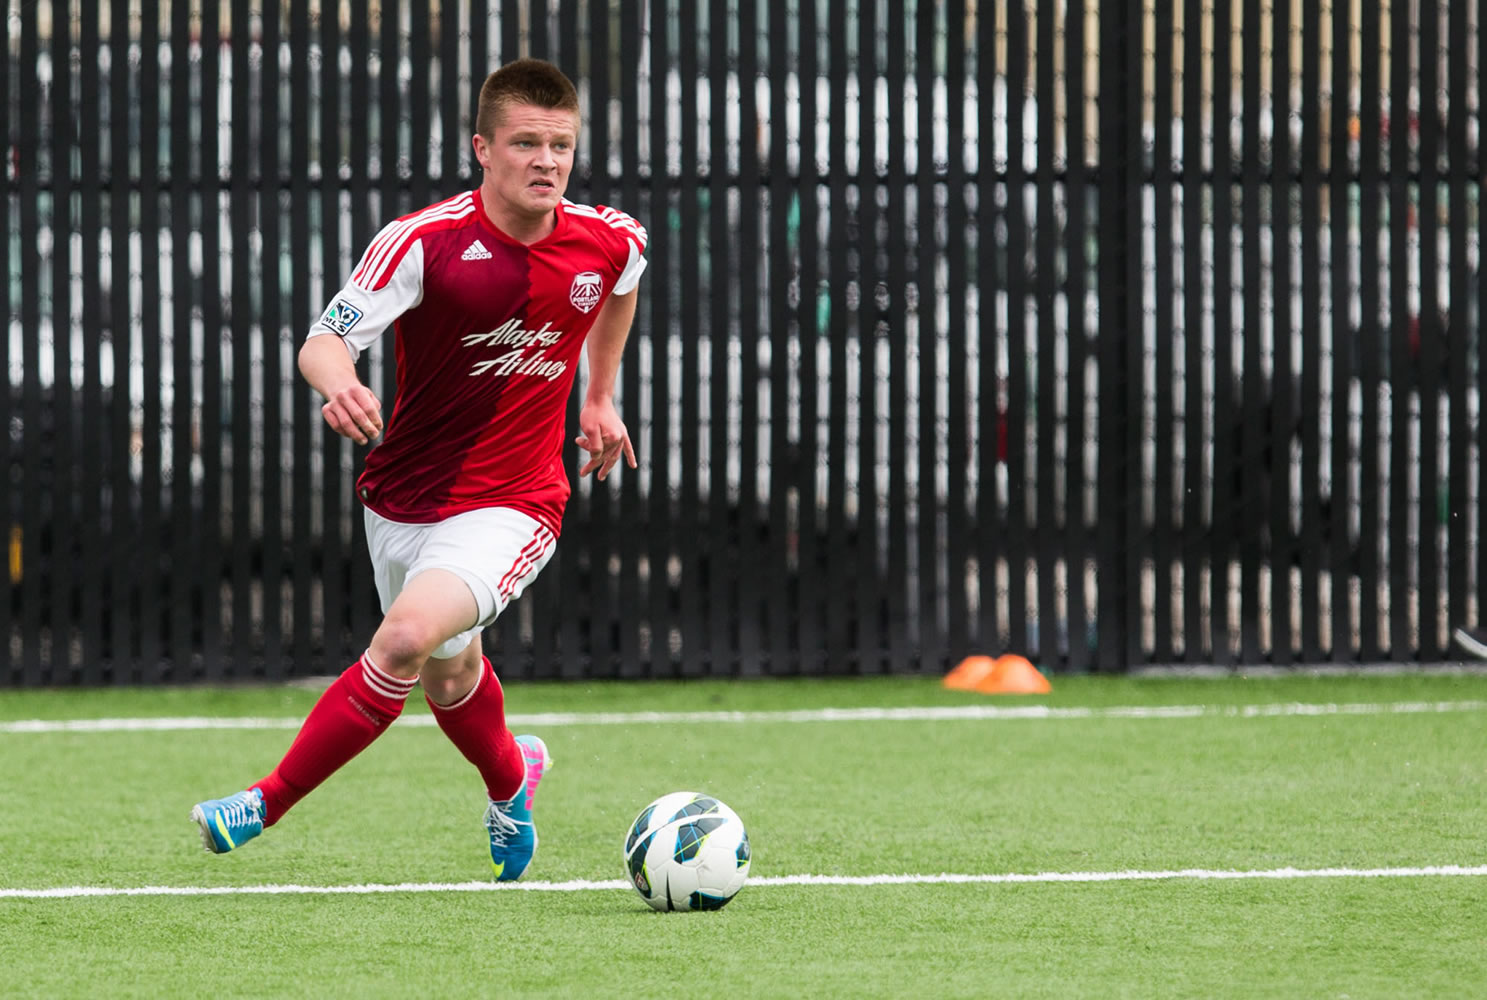 Jacob Kempf of Camas has seen action with the Portland Timbers in MLS Reserve League play.